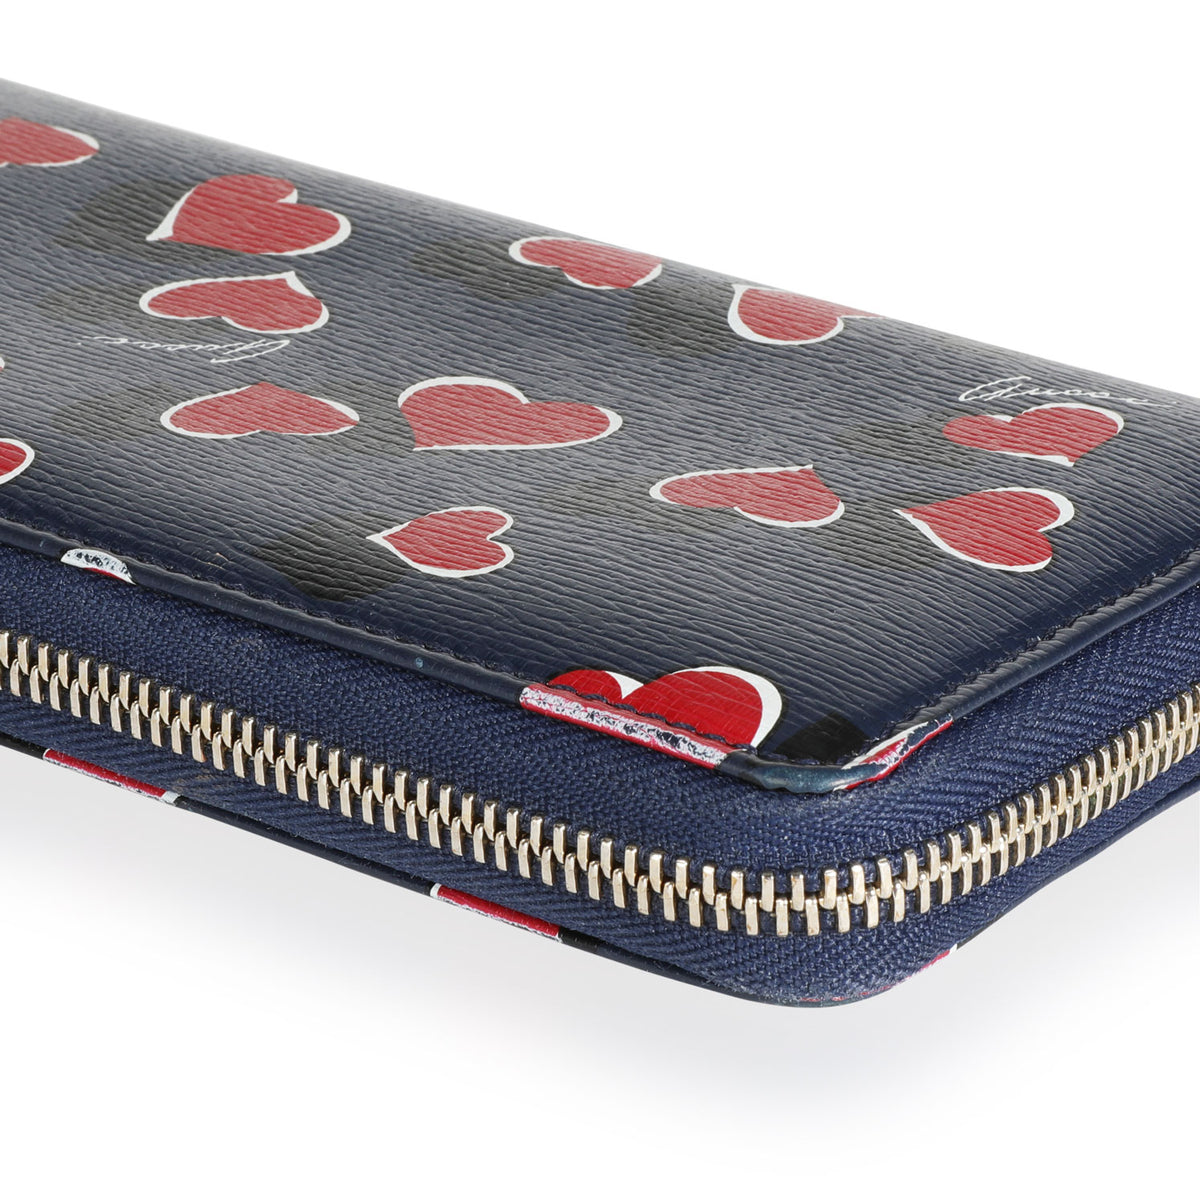 Gucci Blue & Red Hearts Leather Zip-Around Wallet